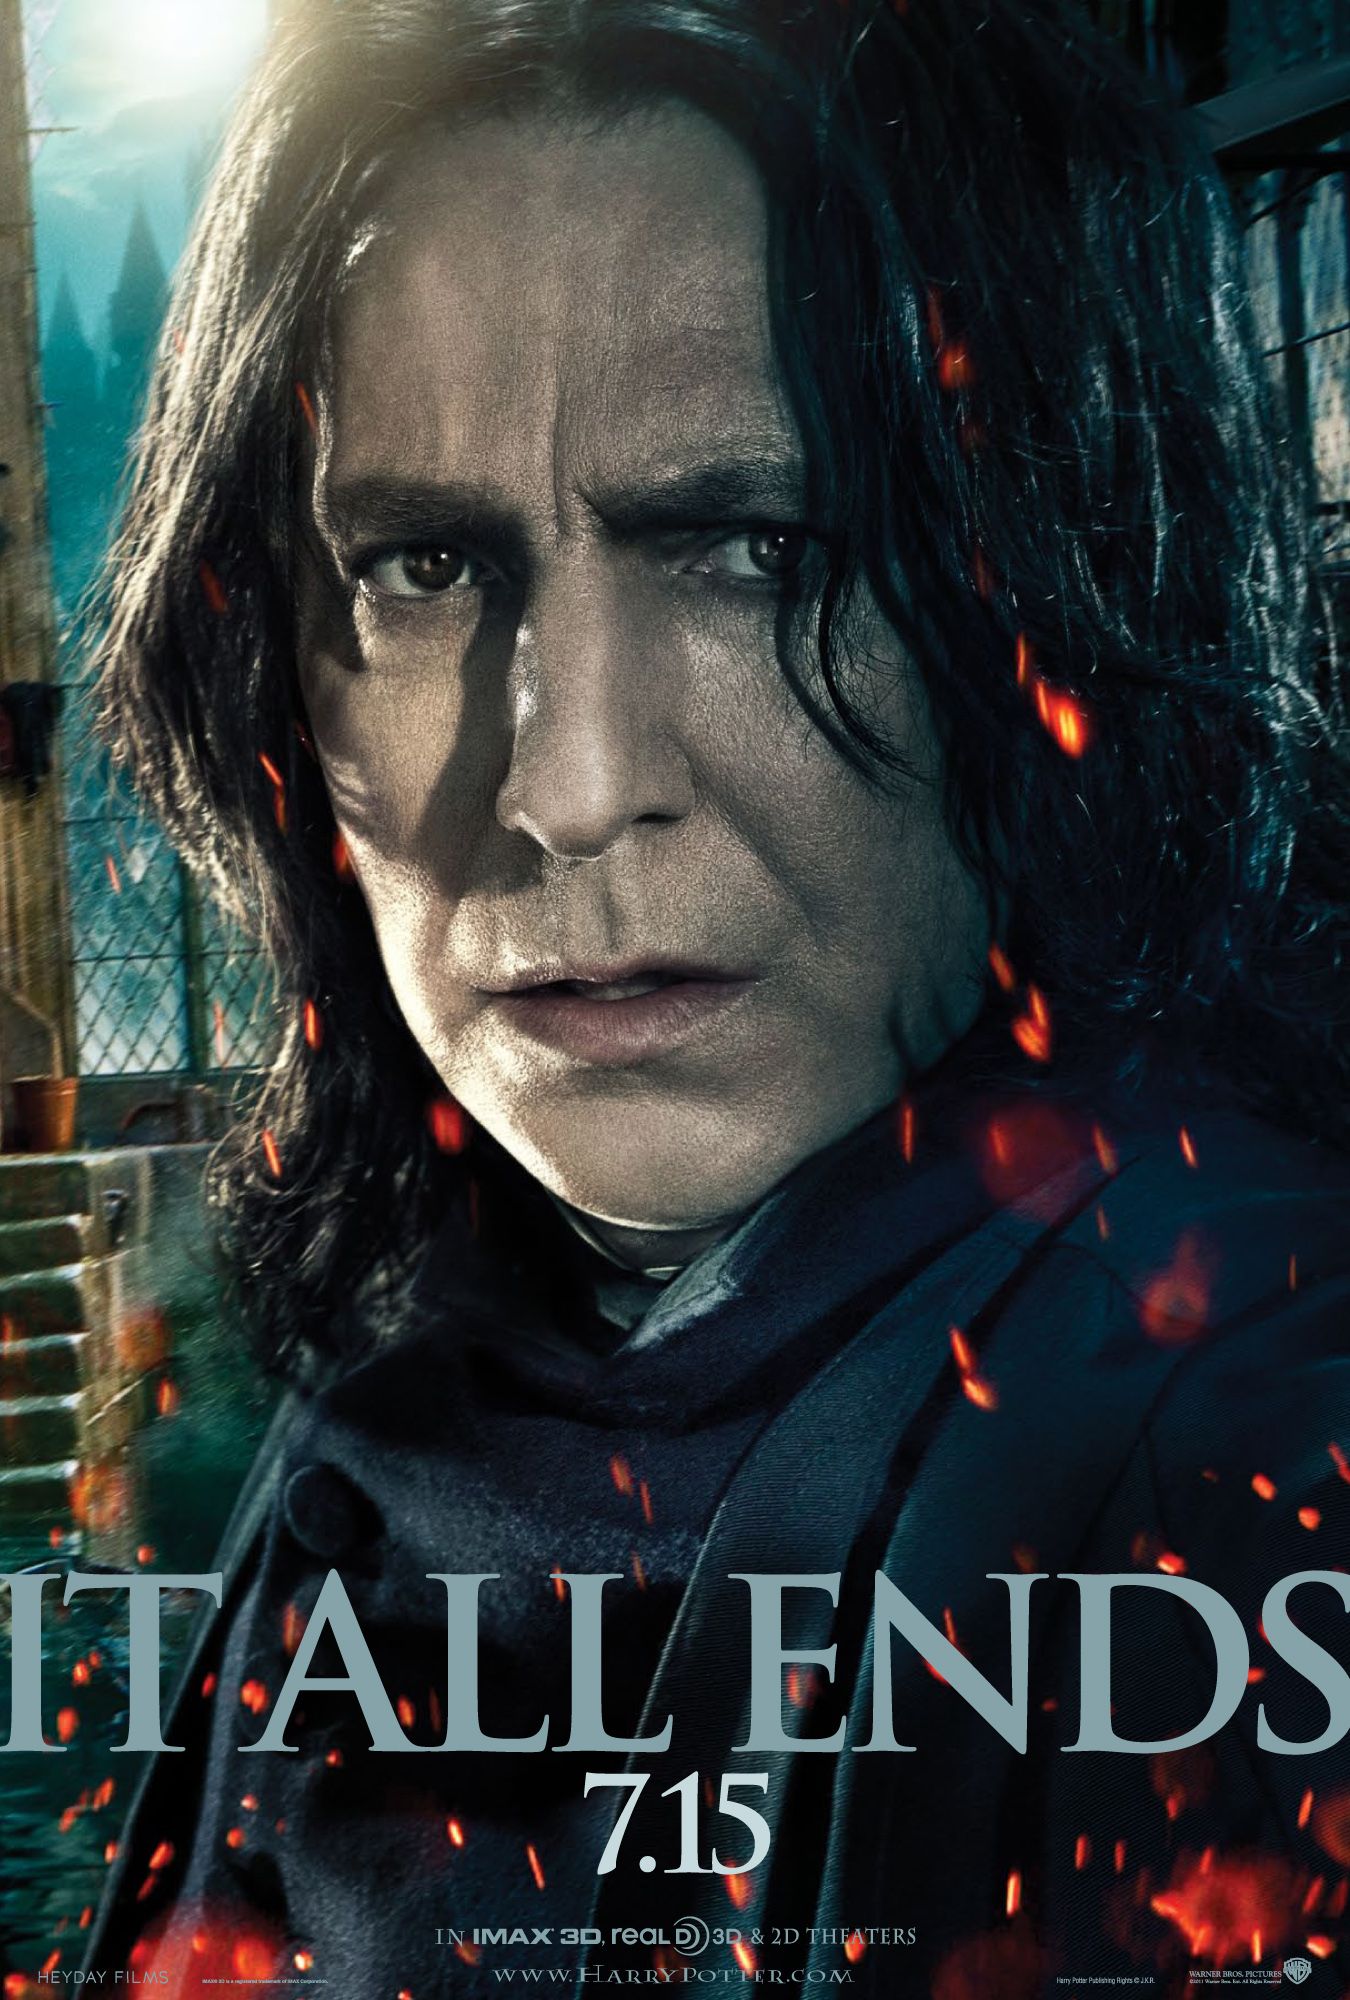 Harry Potter and the Deathly Hallows - Part 2 Severus Snape Poster